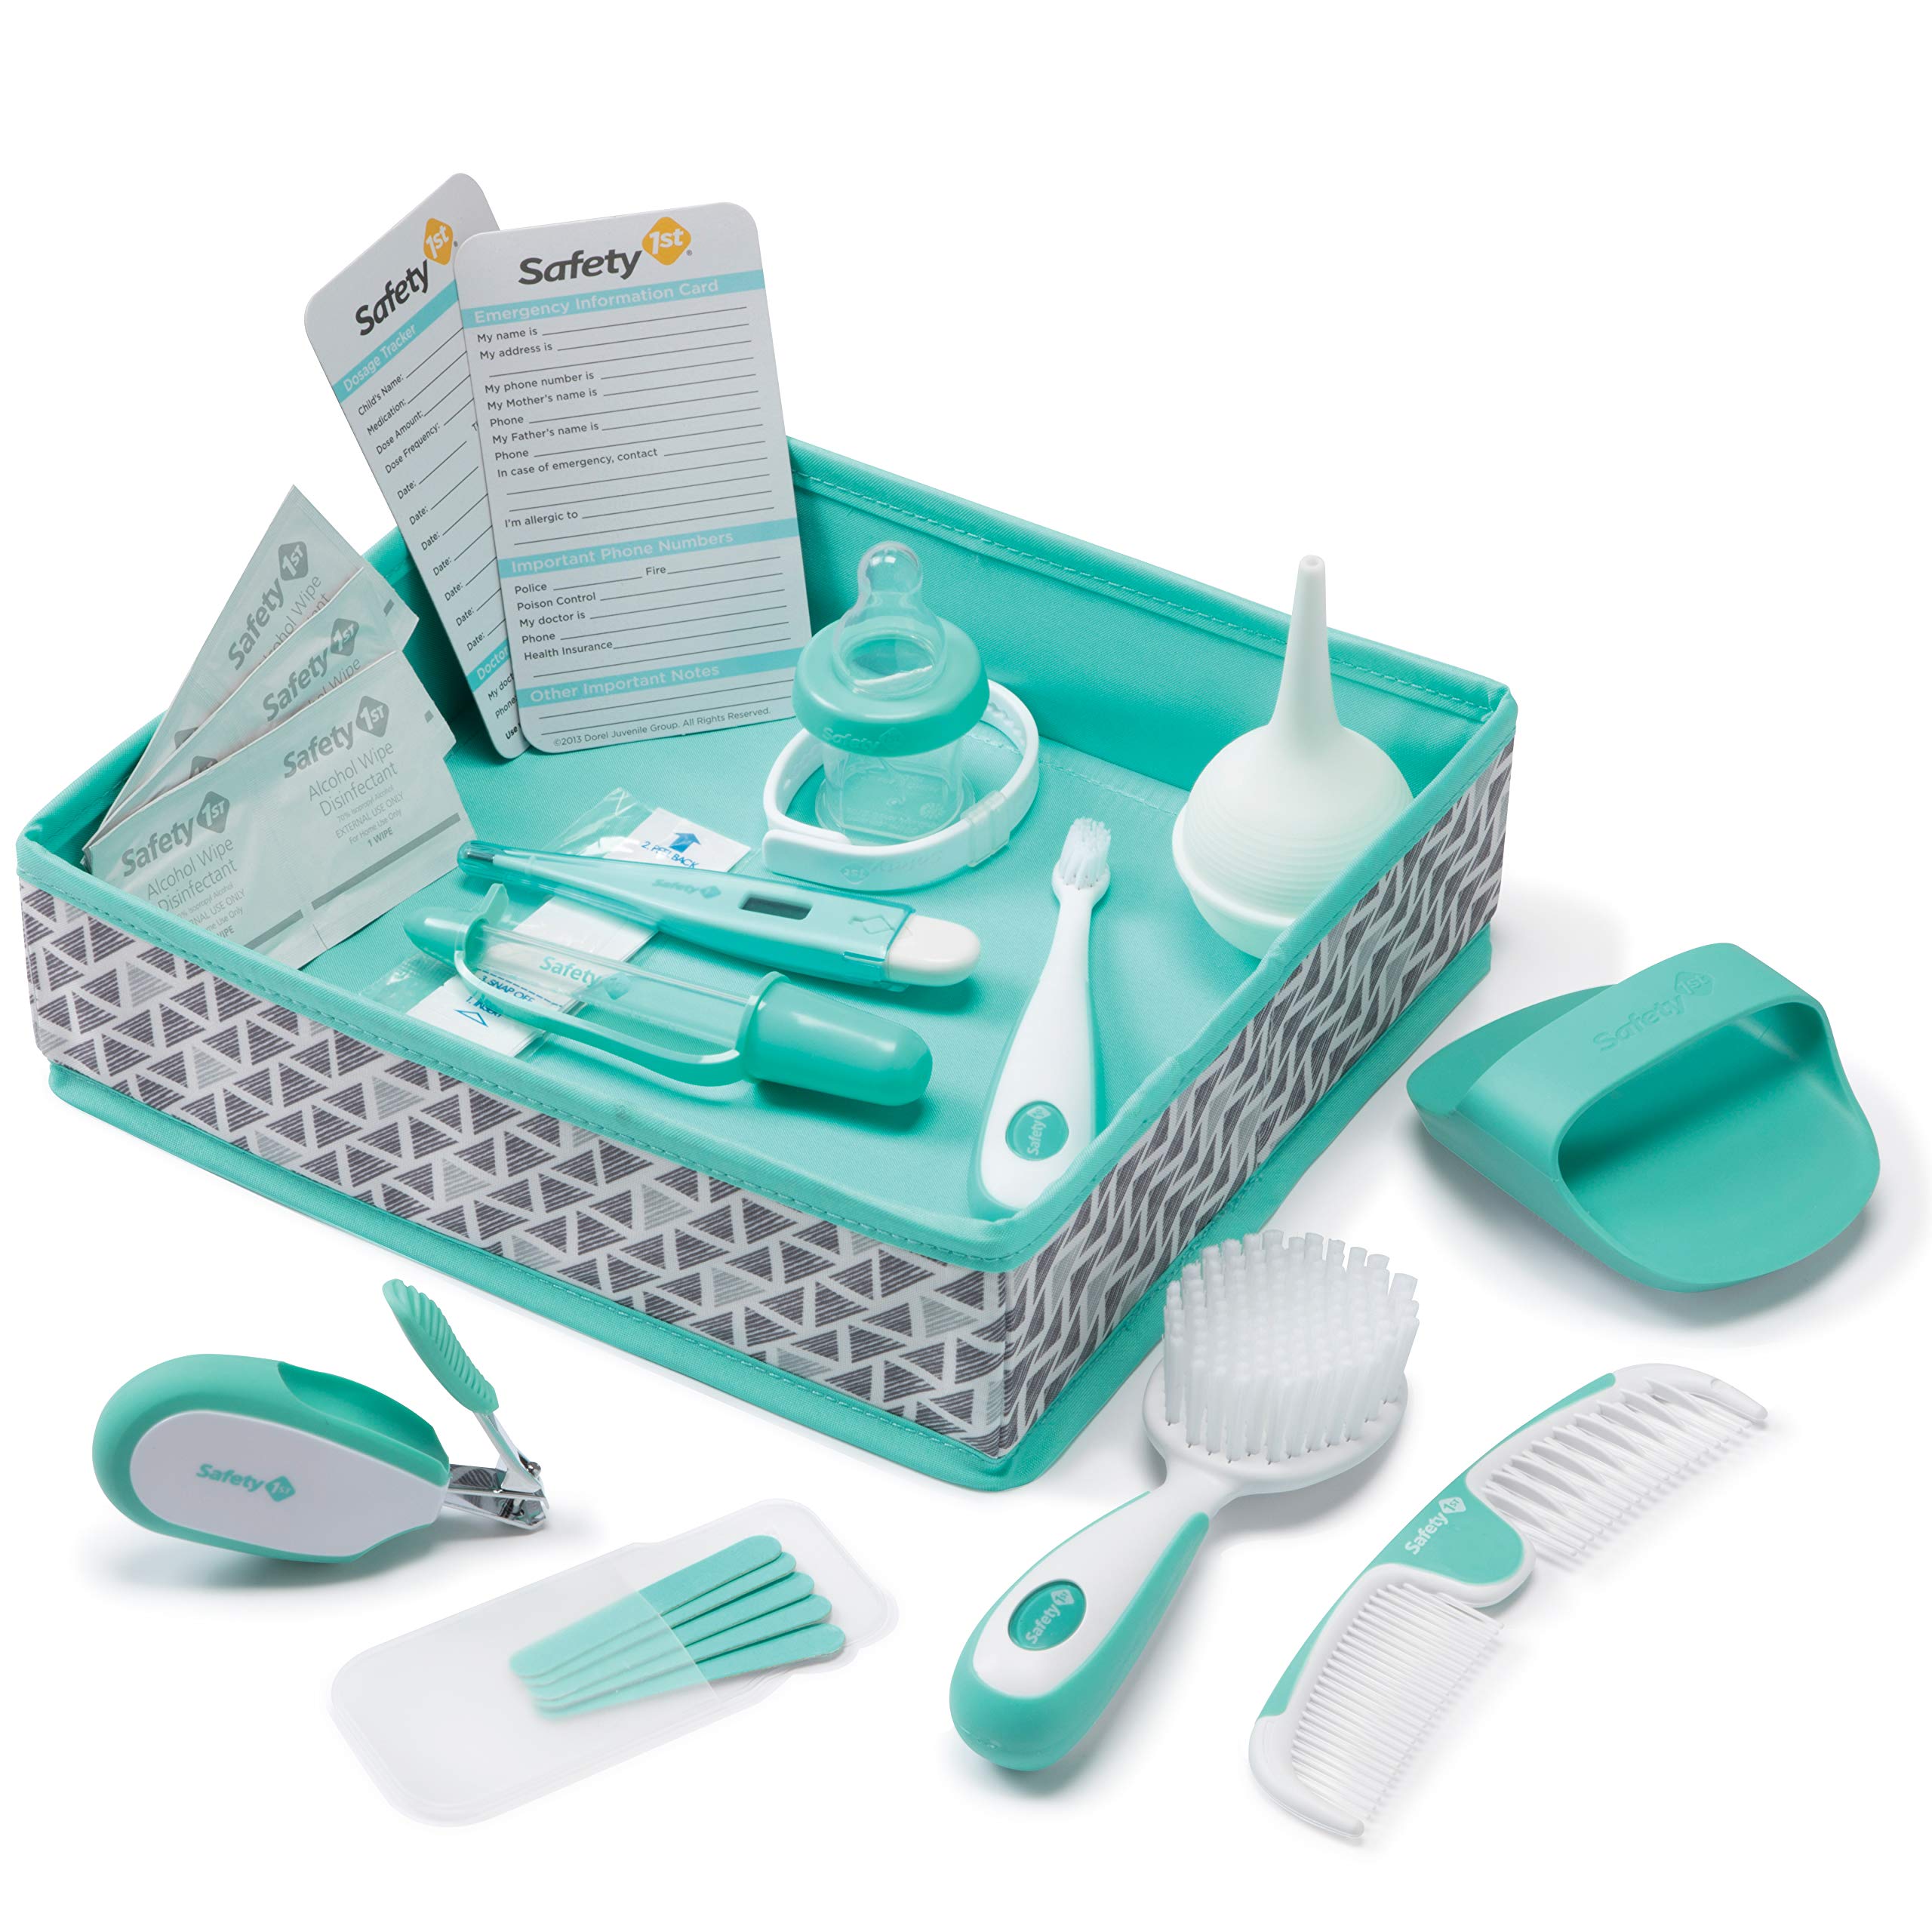 30-Piece Safety 1st Ready for Baby Deluxe Nursery Care Health & Grooming Kit (Aqua) $11.99 + Free Shipping w/ Prime or on $35+